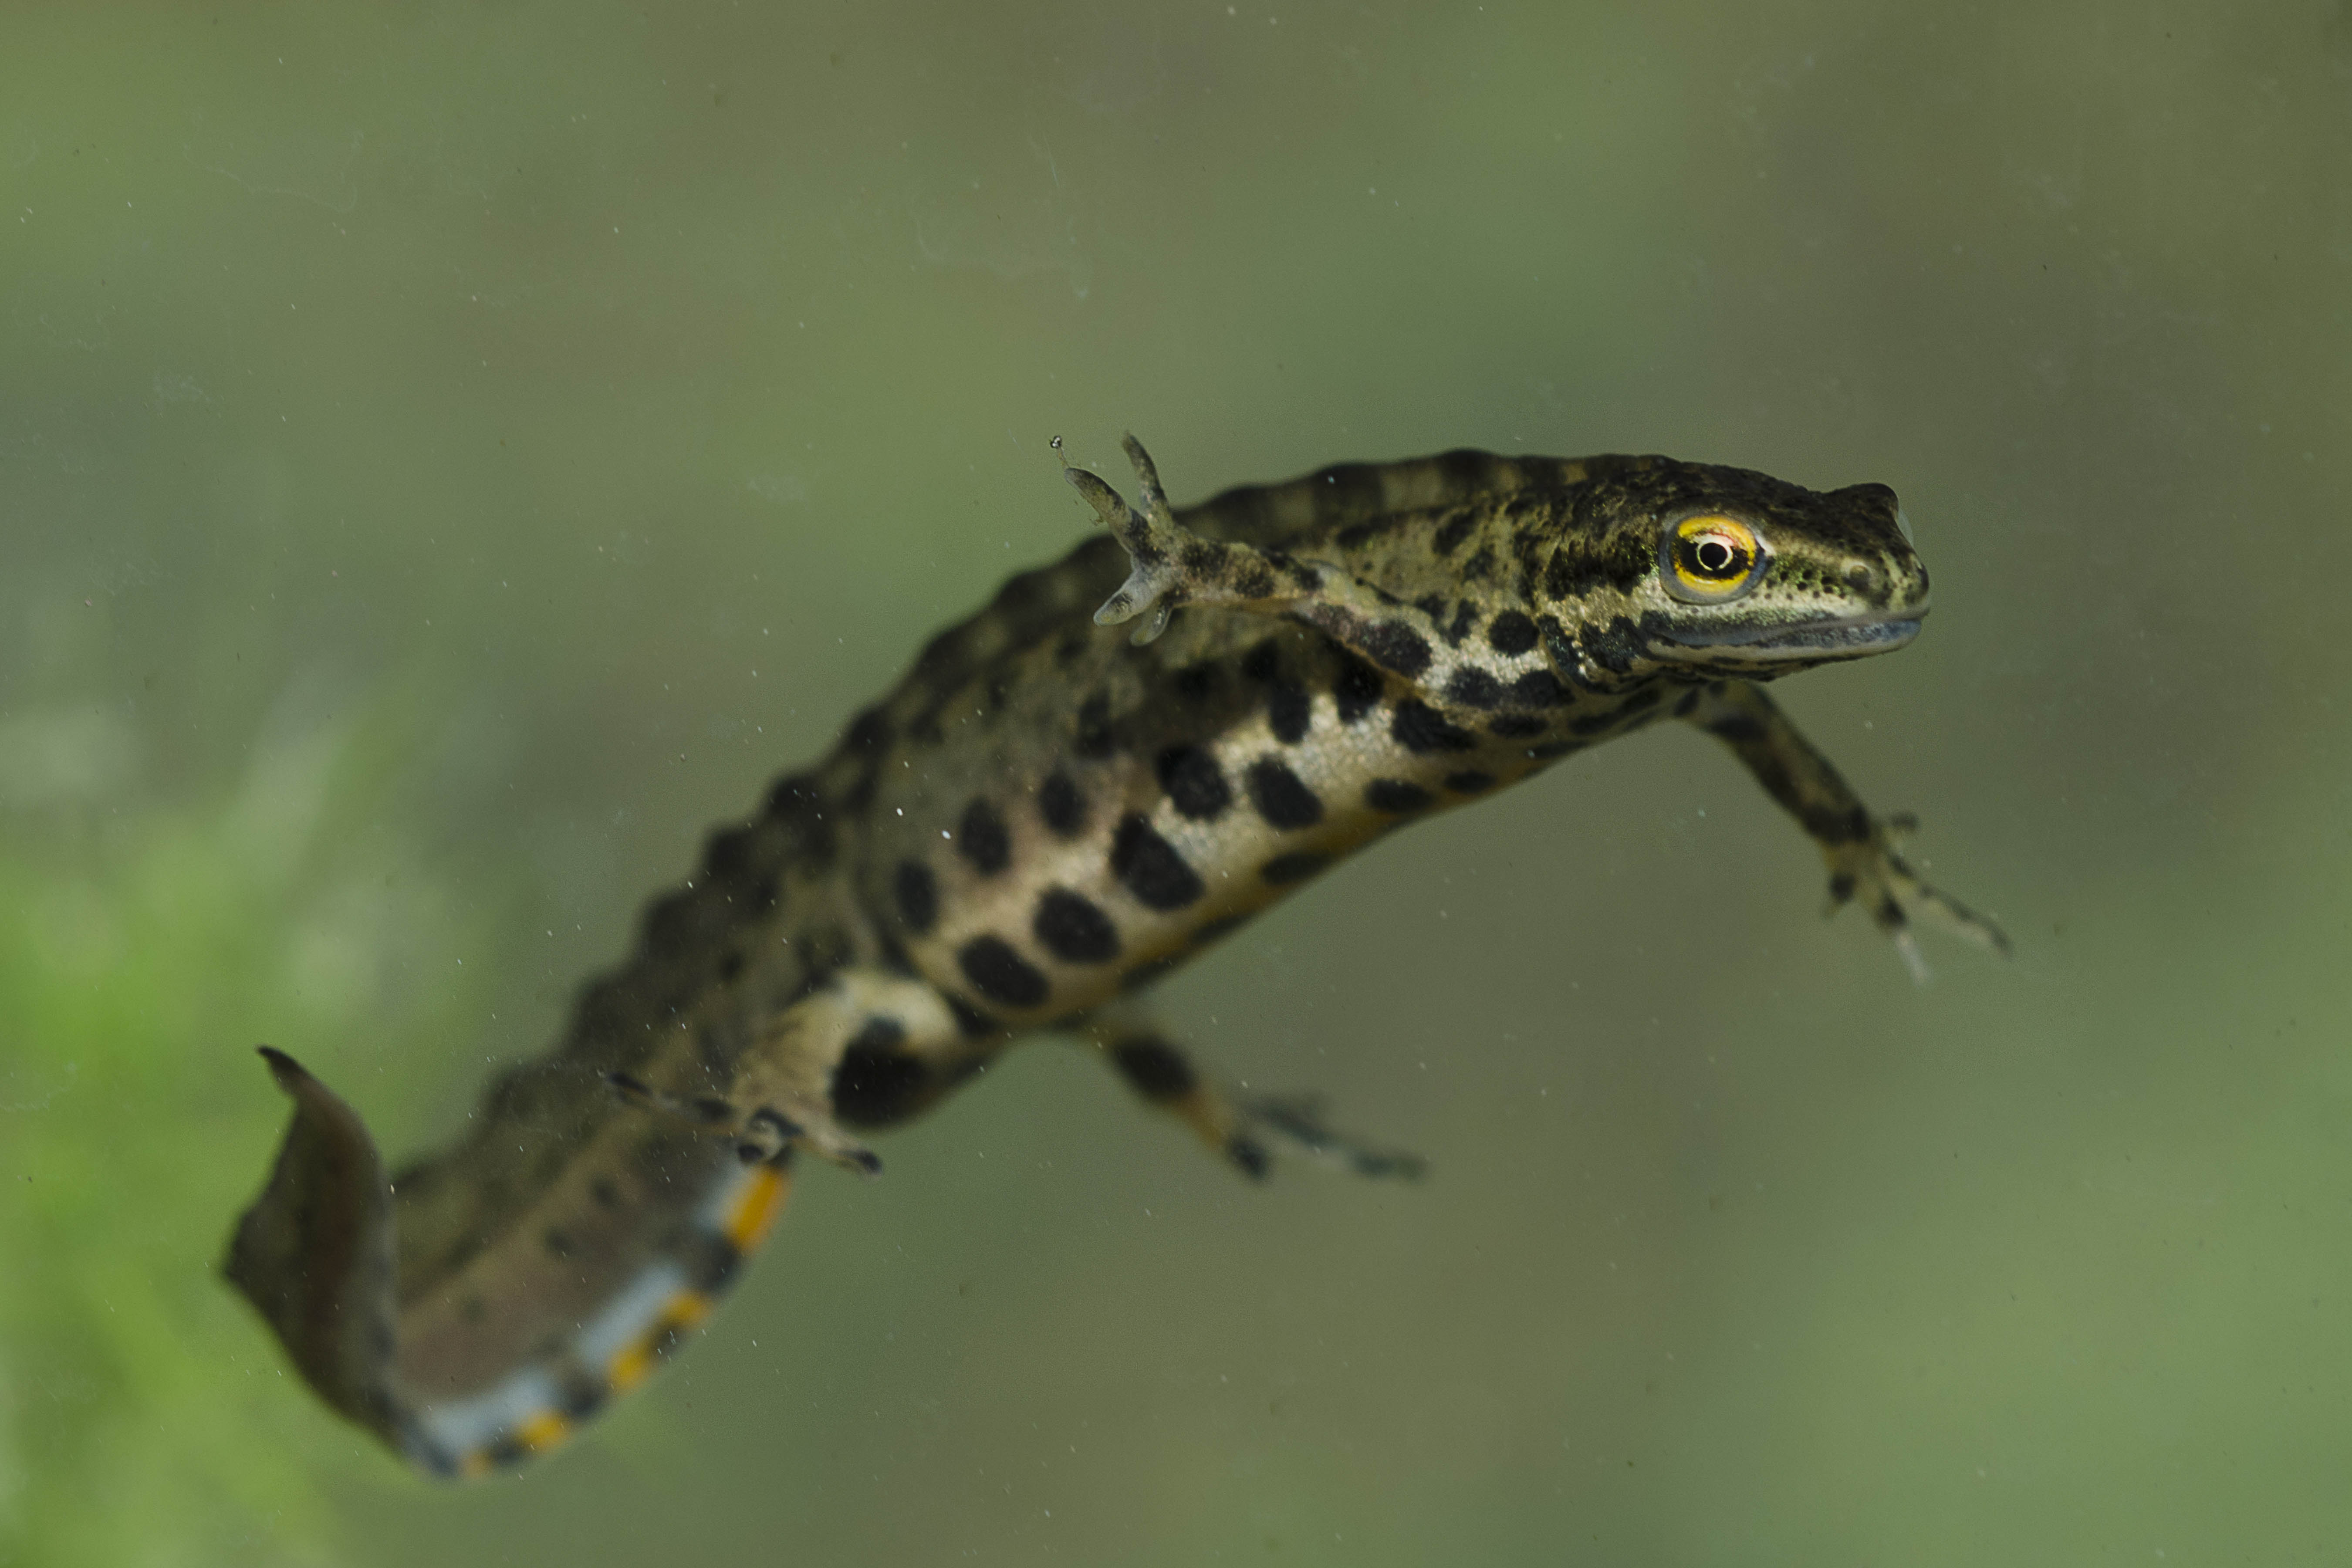 Male smooth newt